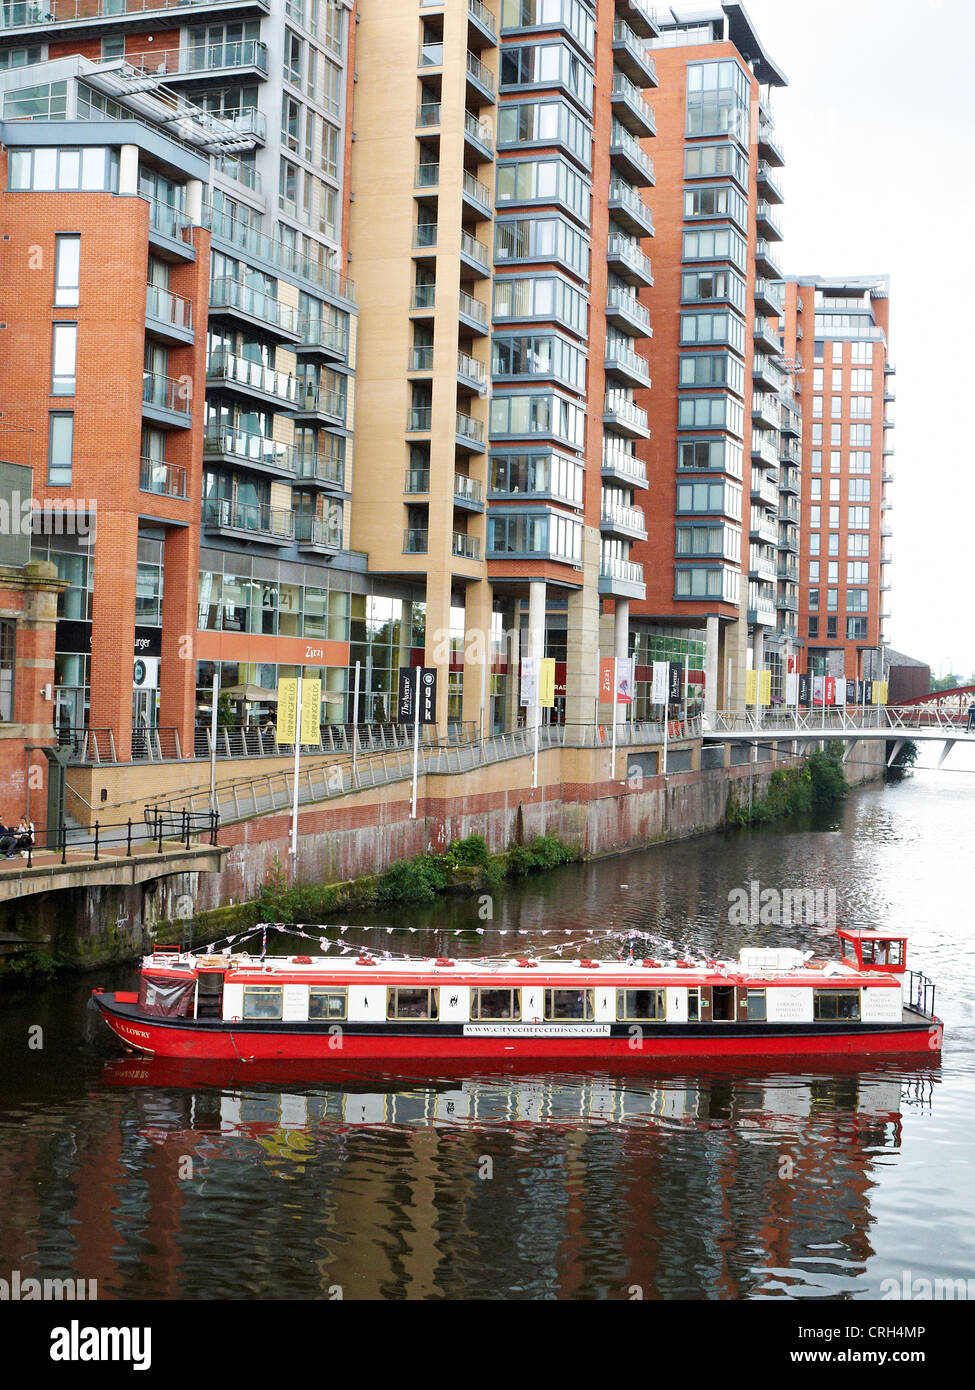 L.S.Lowry tour boat on the River Irwell near Spinningfields in Manchester UK Stock Photo